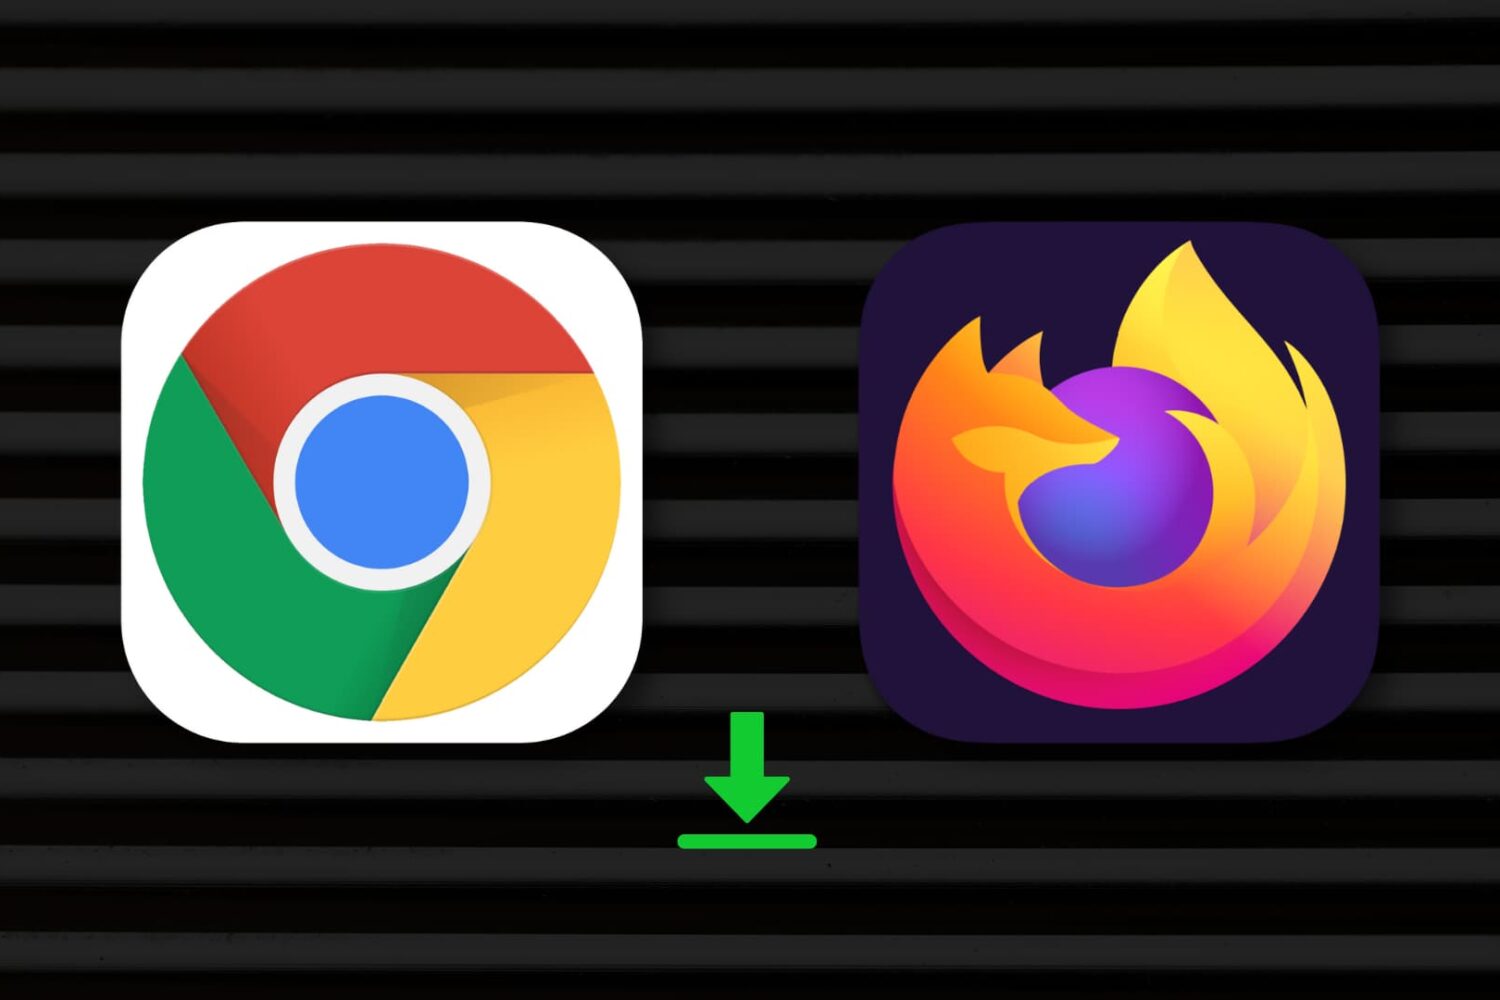 Chrome and Firefox Mac app icons with a download button